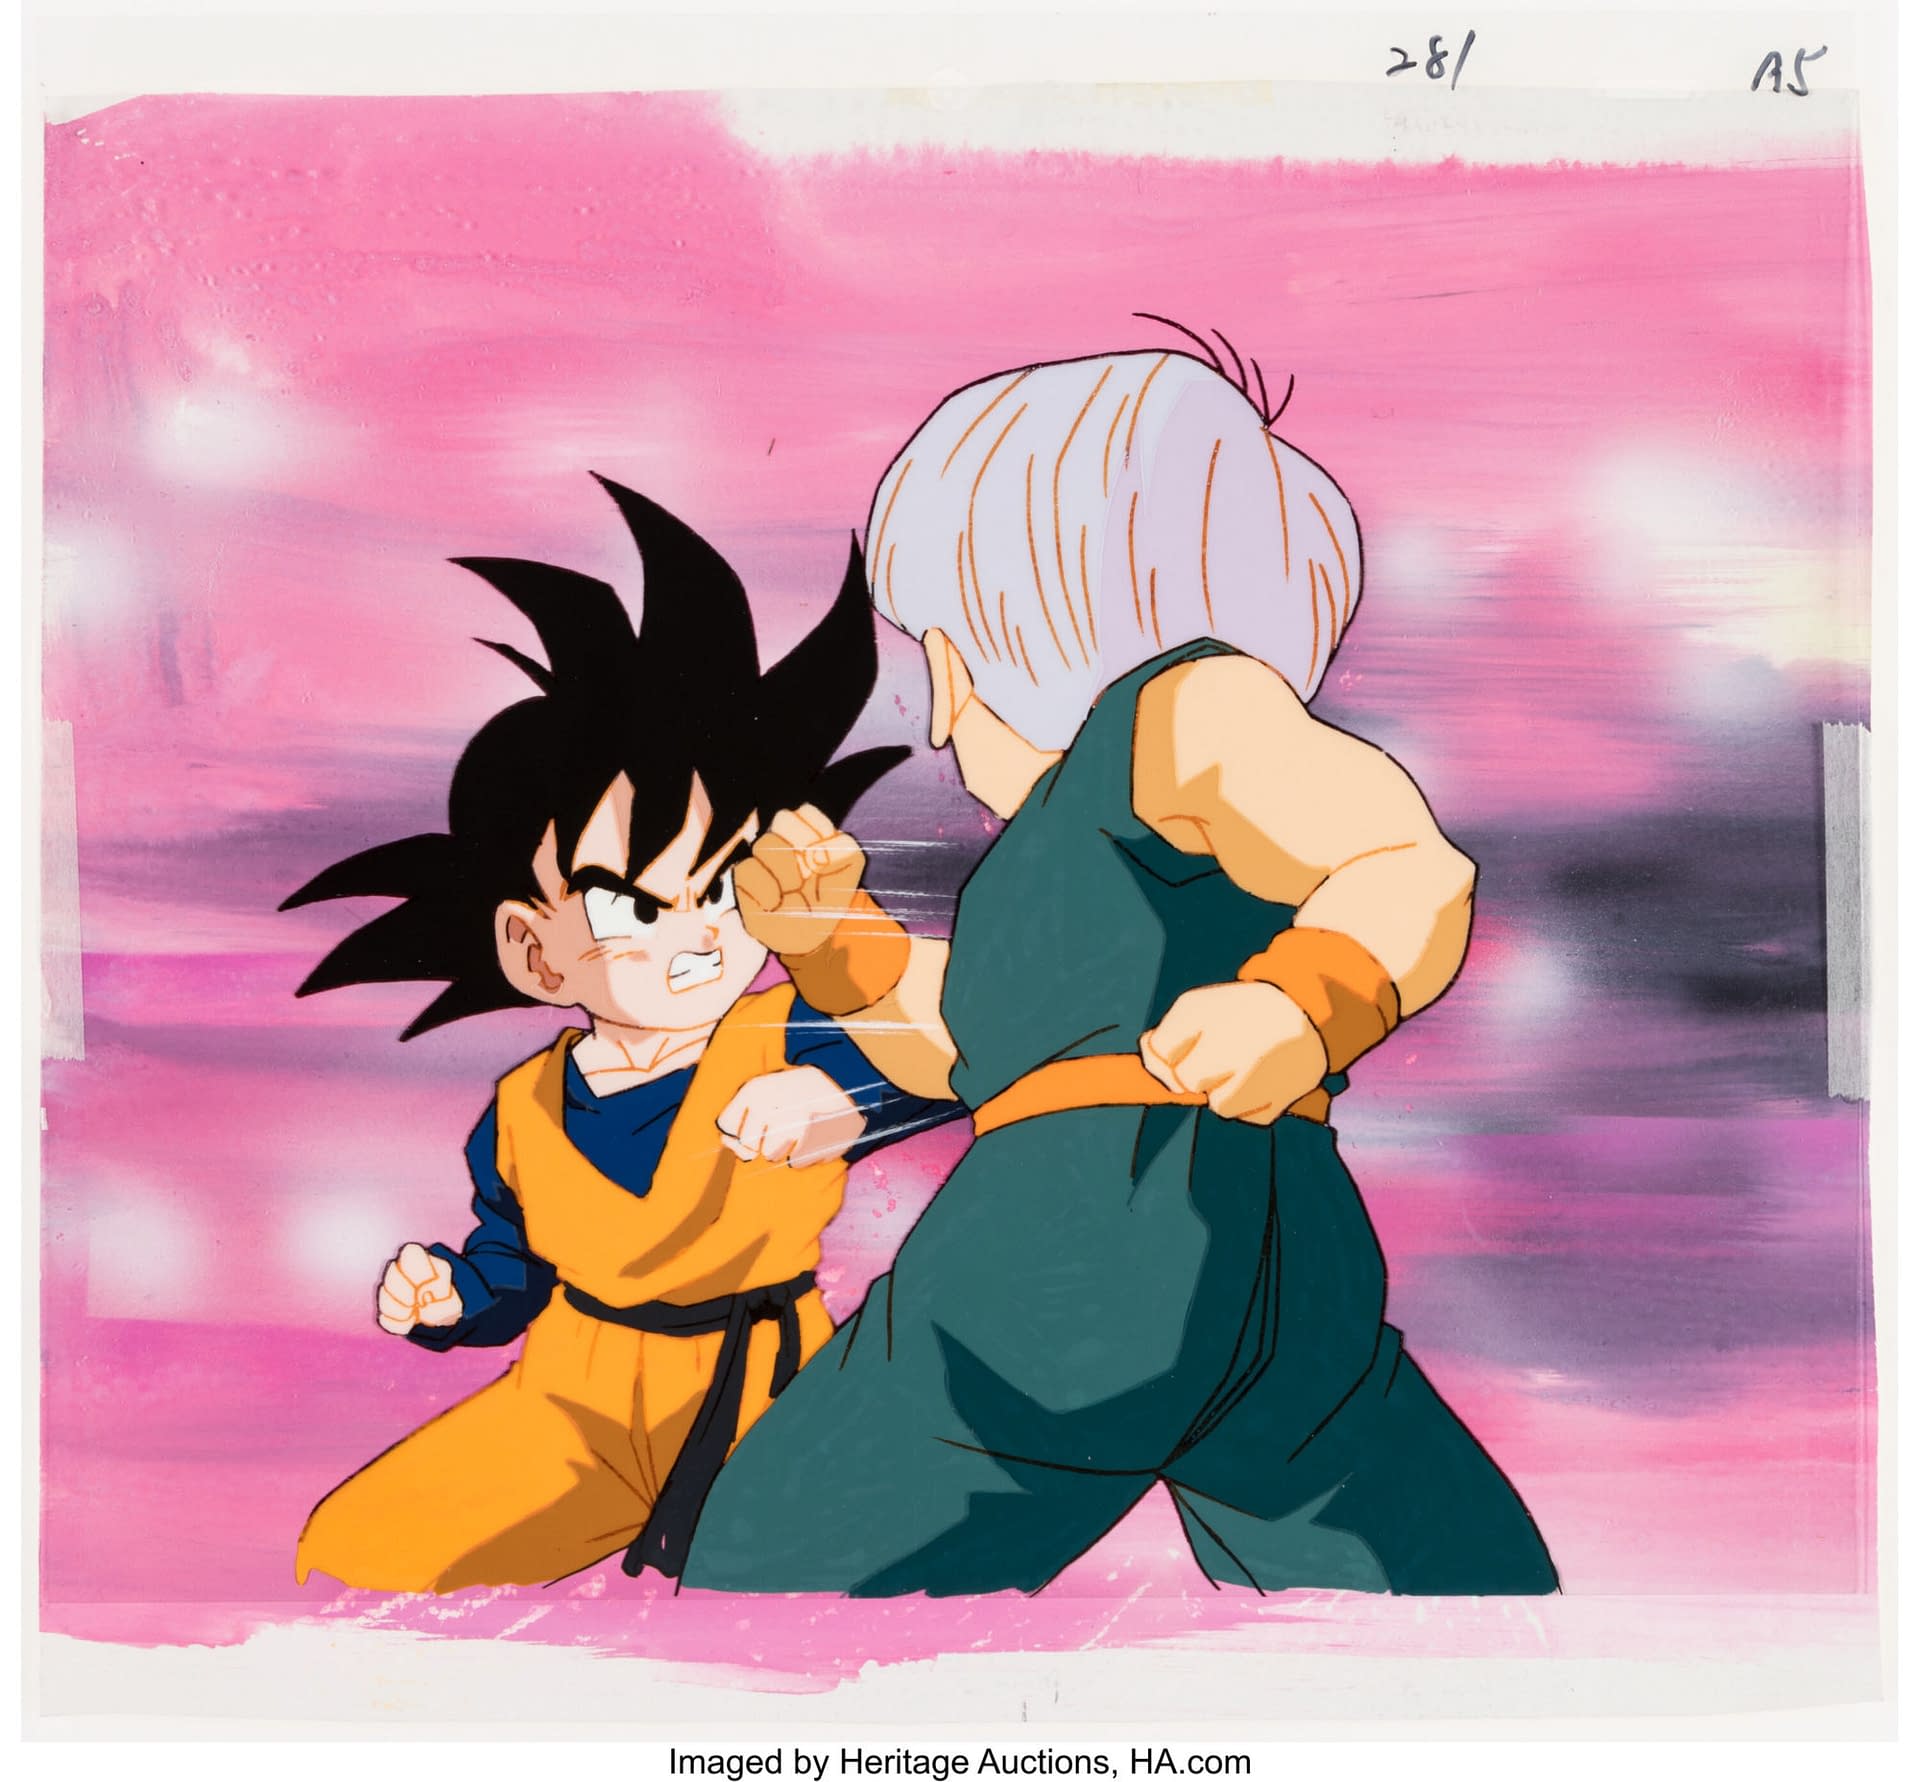 Go Behind The Scenes Of Dragon Ball Z With This Trunks And Goten Cel